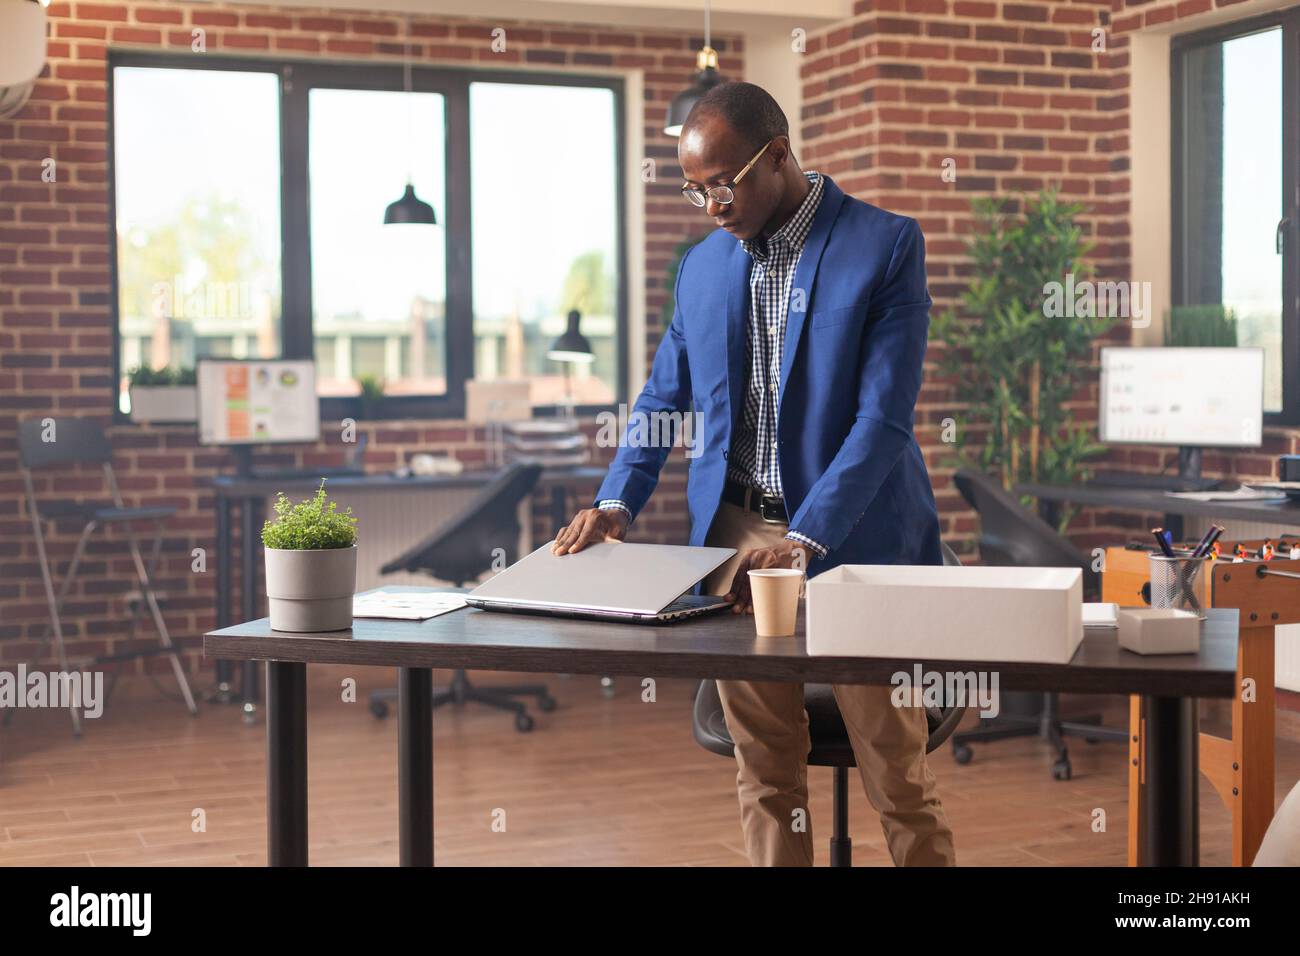 African american man gathering belongings in box after getting fired from business workplace. Frustrated person preparing to leave work after being discharged and dismissed by manager. Stock Photo